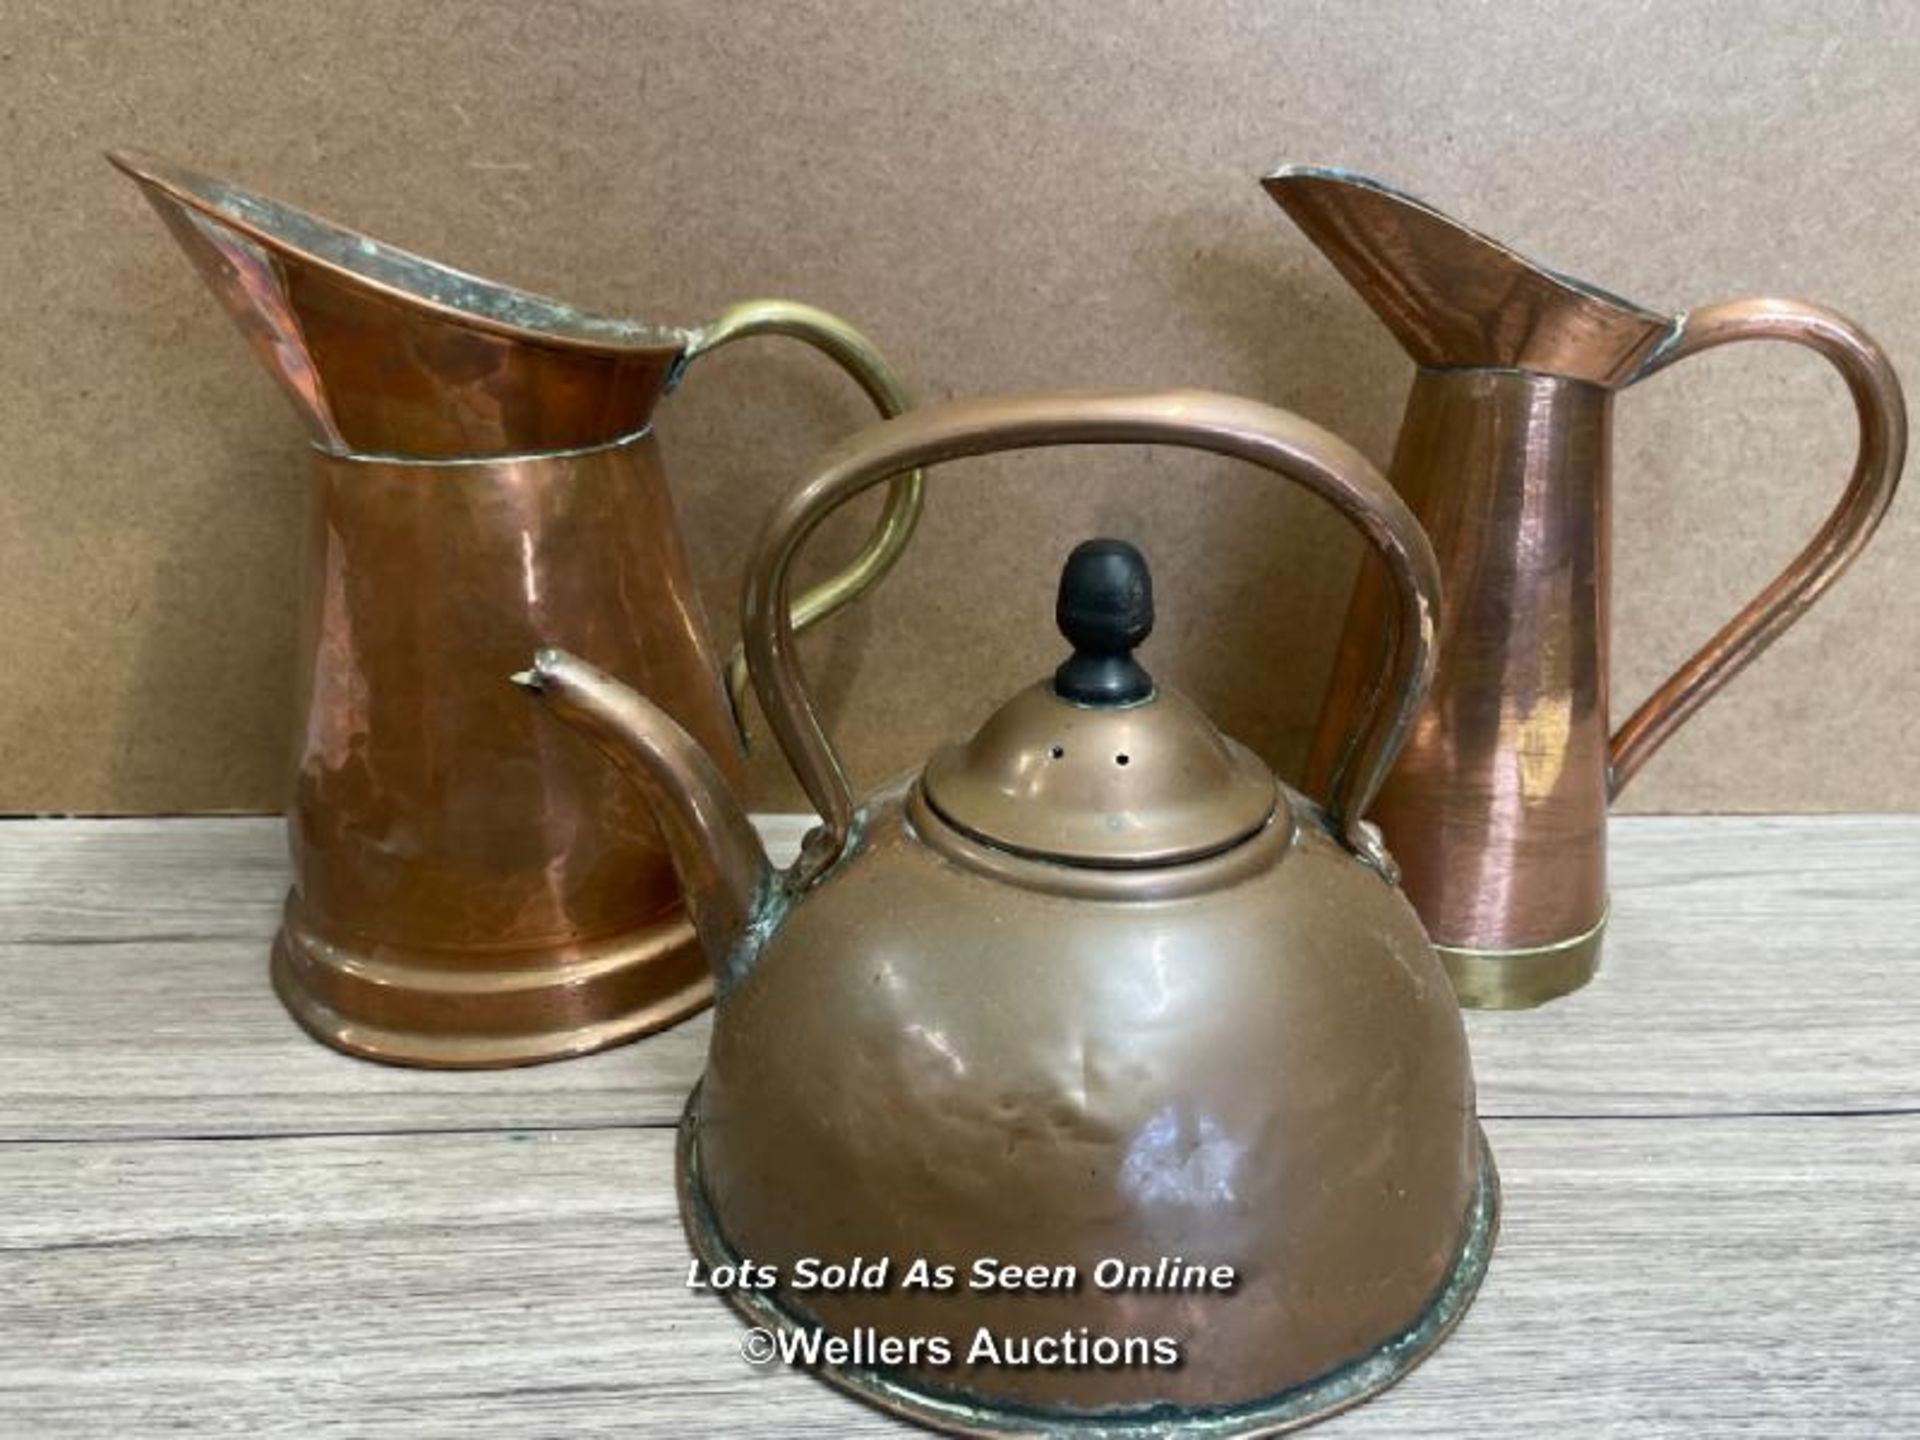 TWO COPPER WATER JUGS AND KETTLE